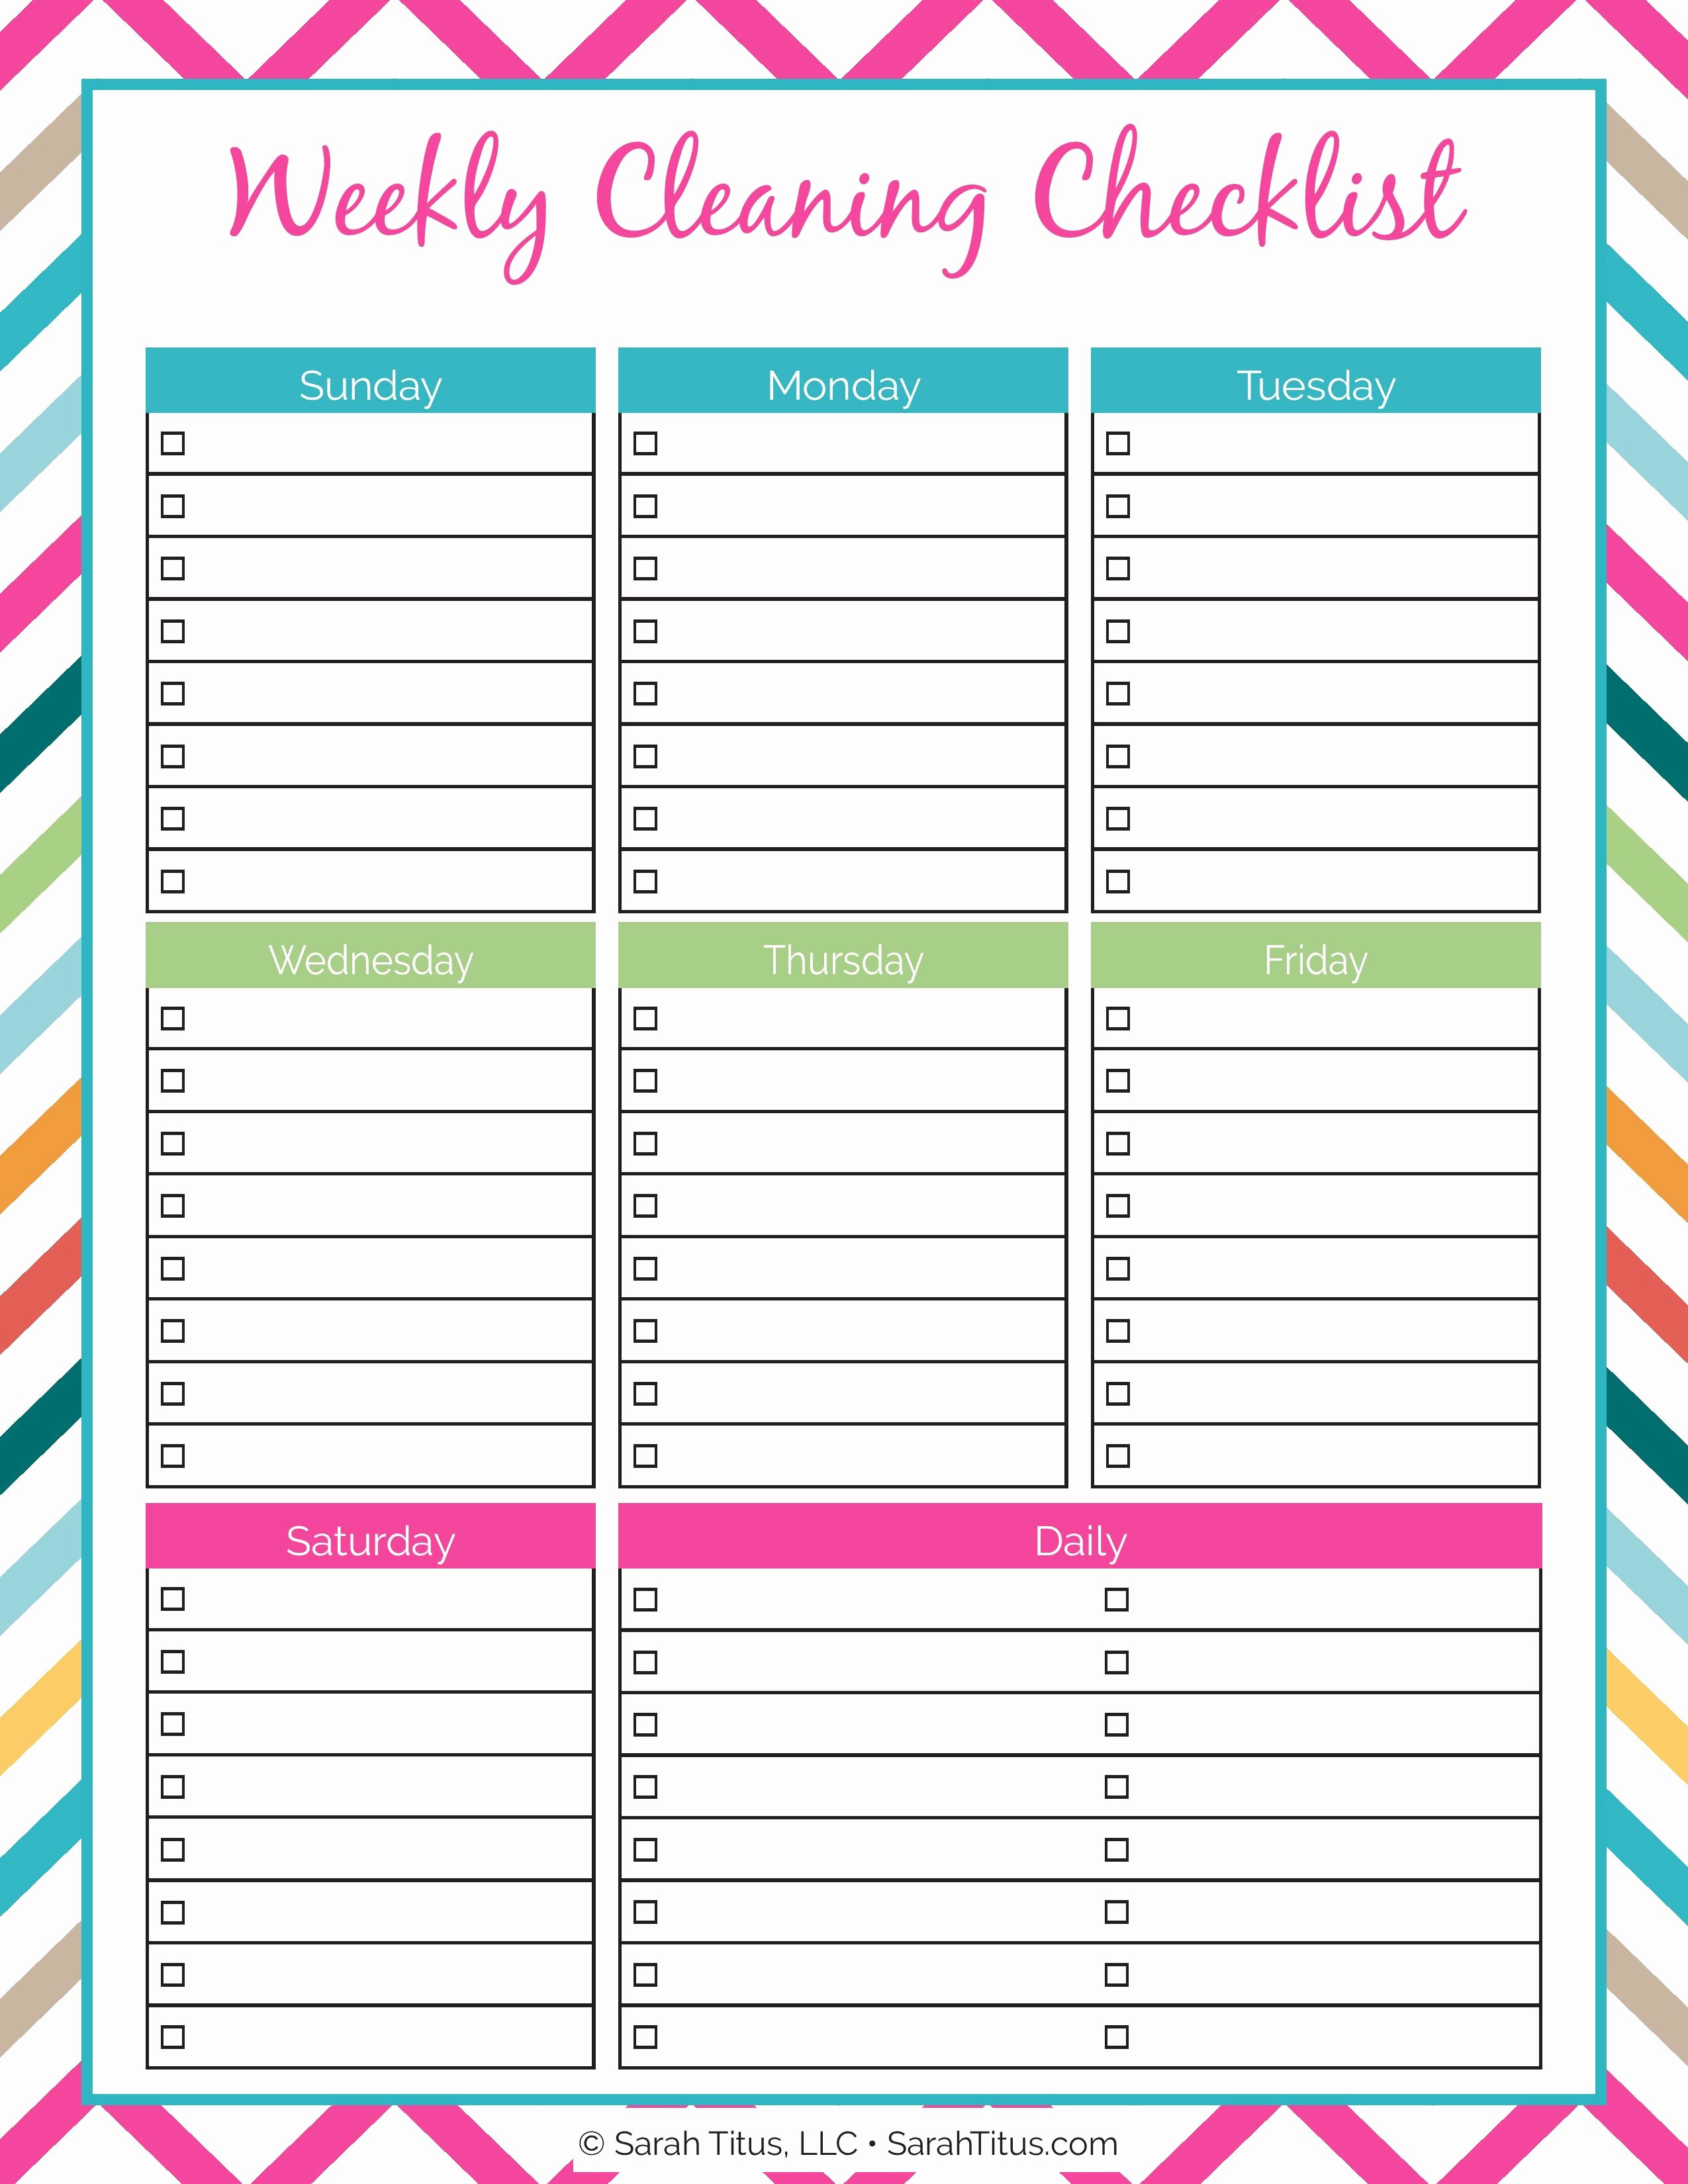 Weekly Cleaning Schedule Template Lovely Cleaning Binder Weekly Cleaning Checklist Sarah Titus